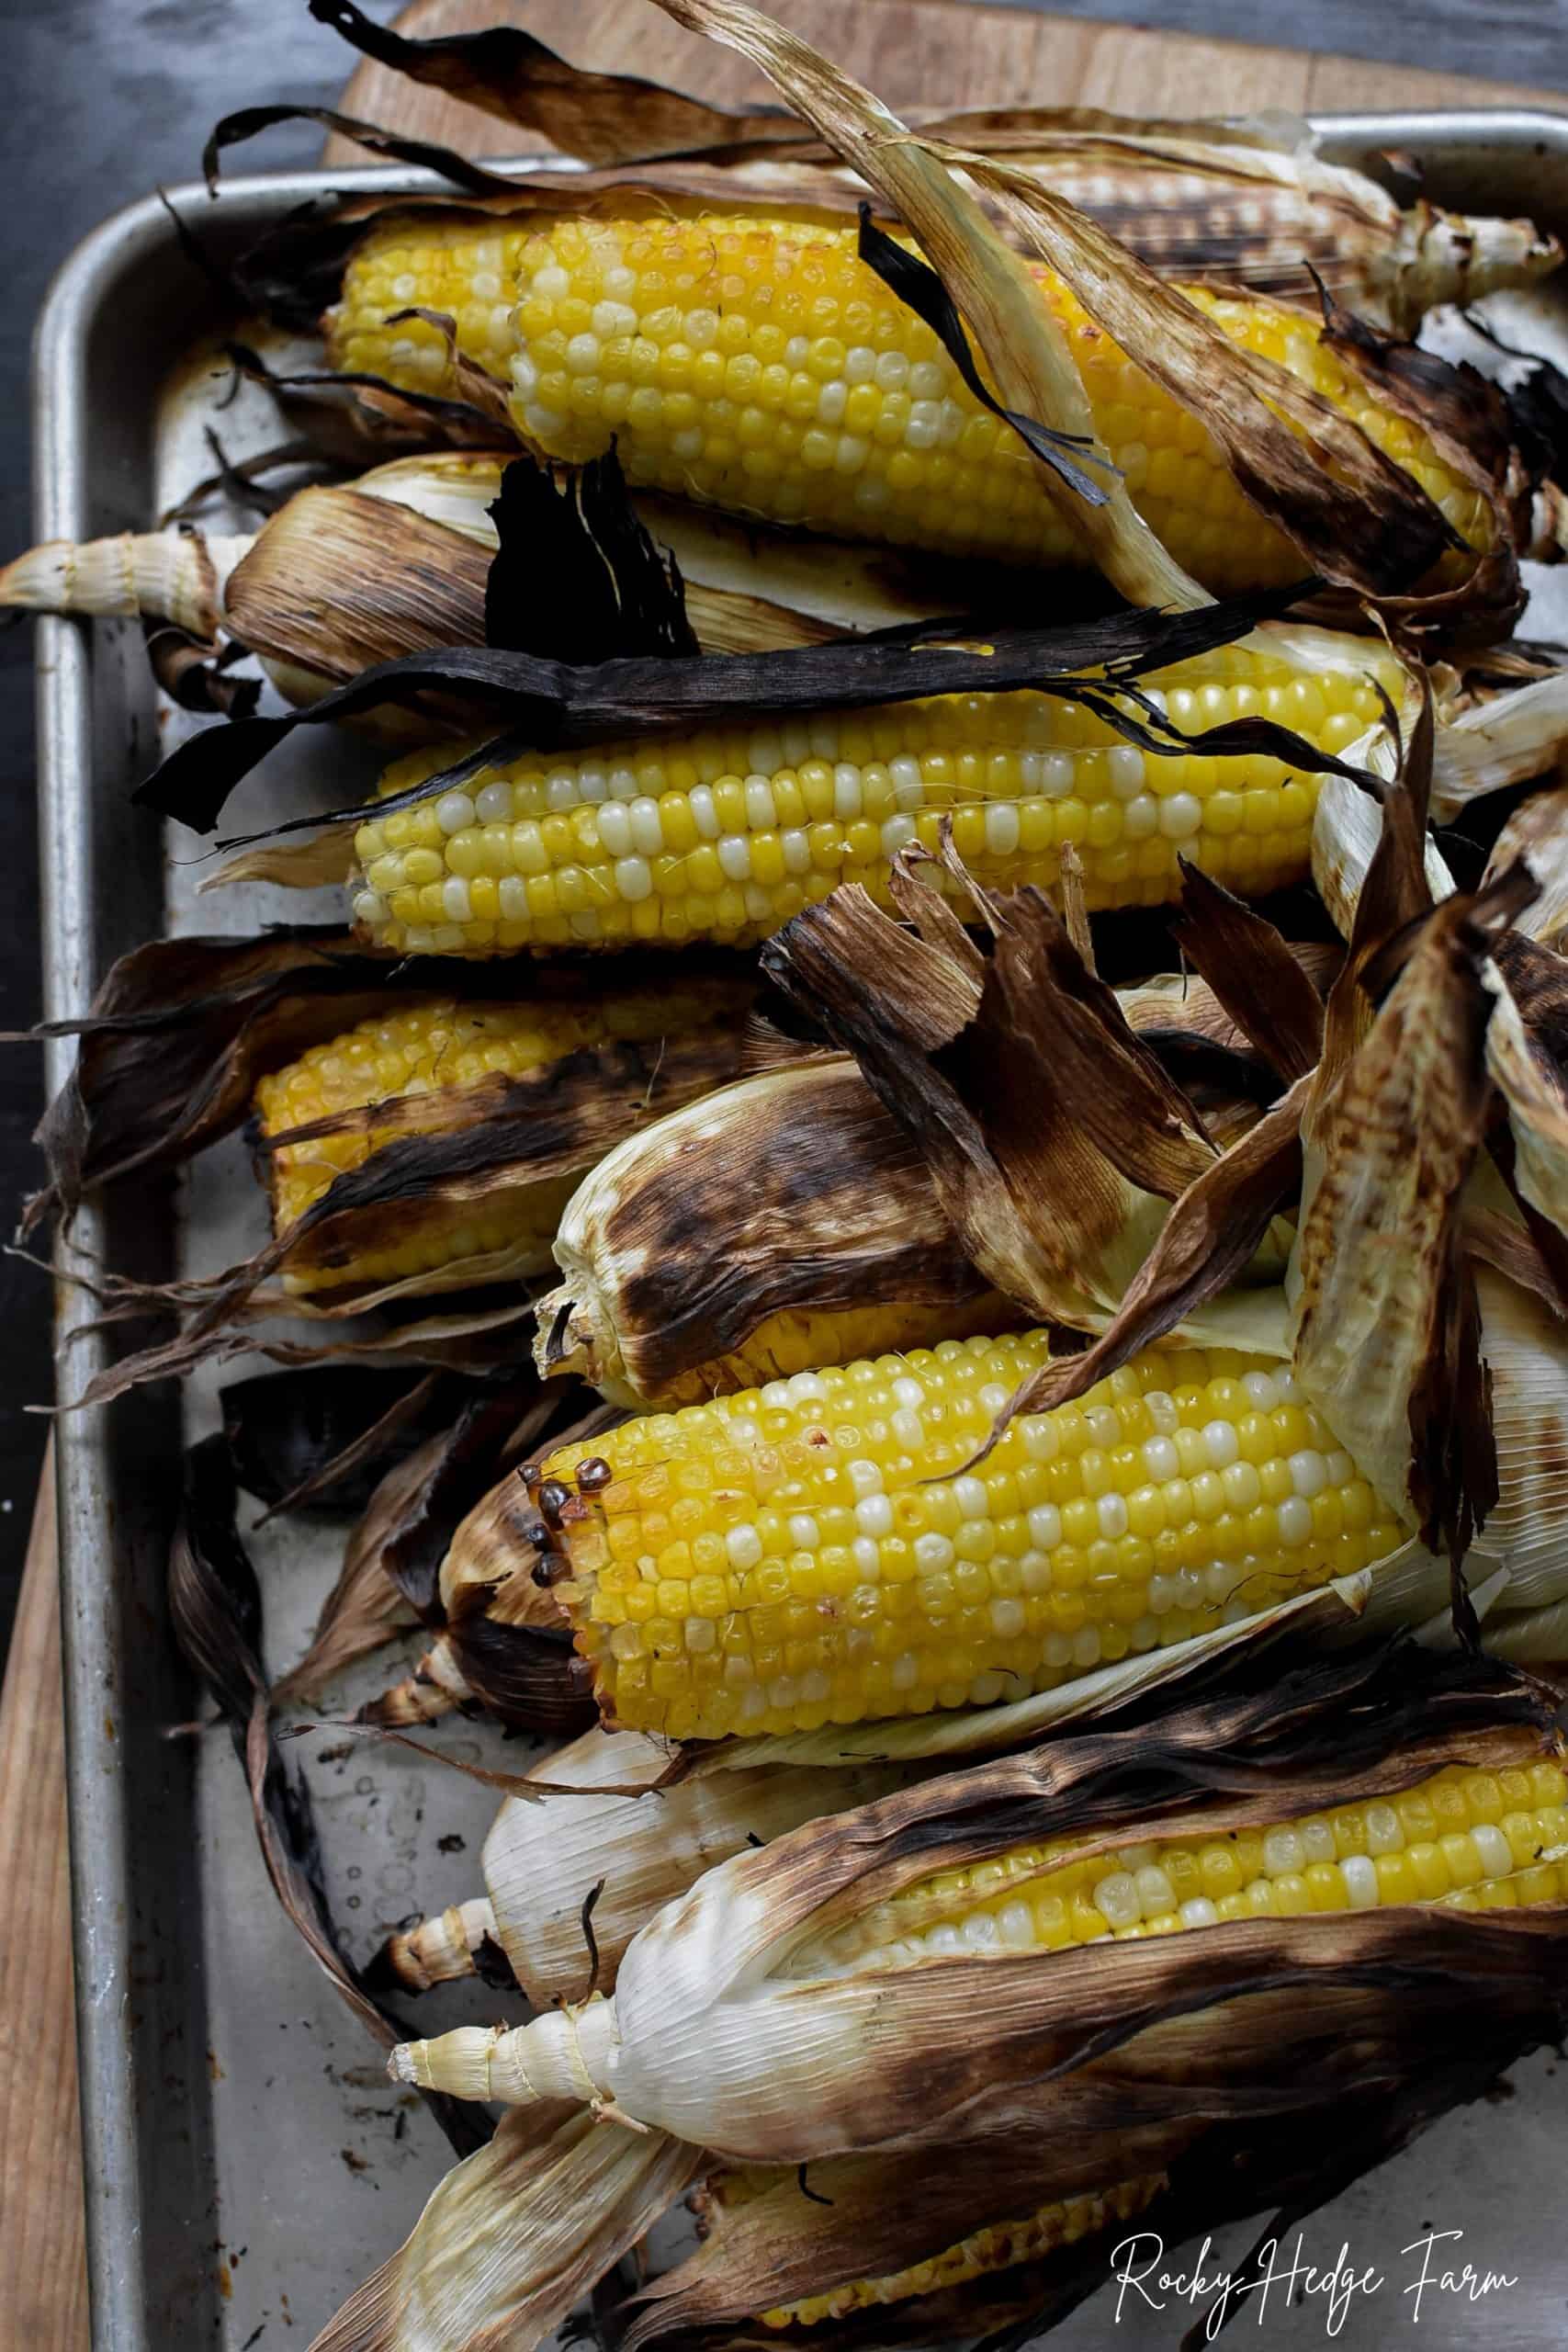 Corn Husk Recipes And More: Using Corn Husks From The Garden